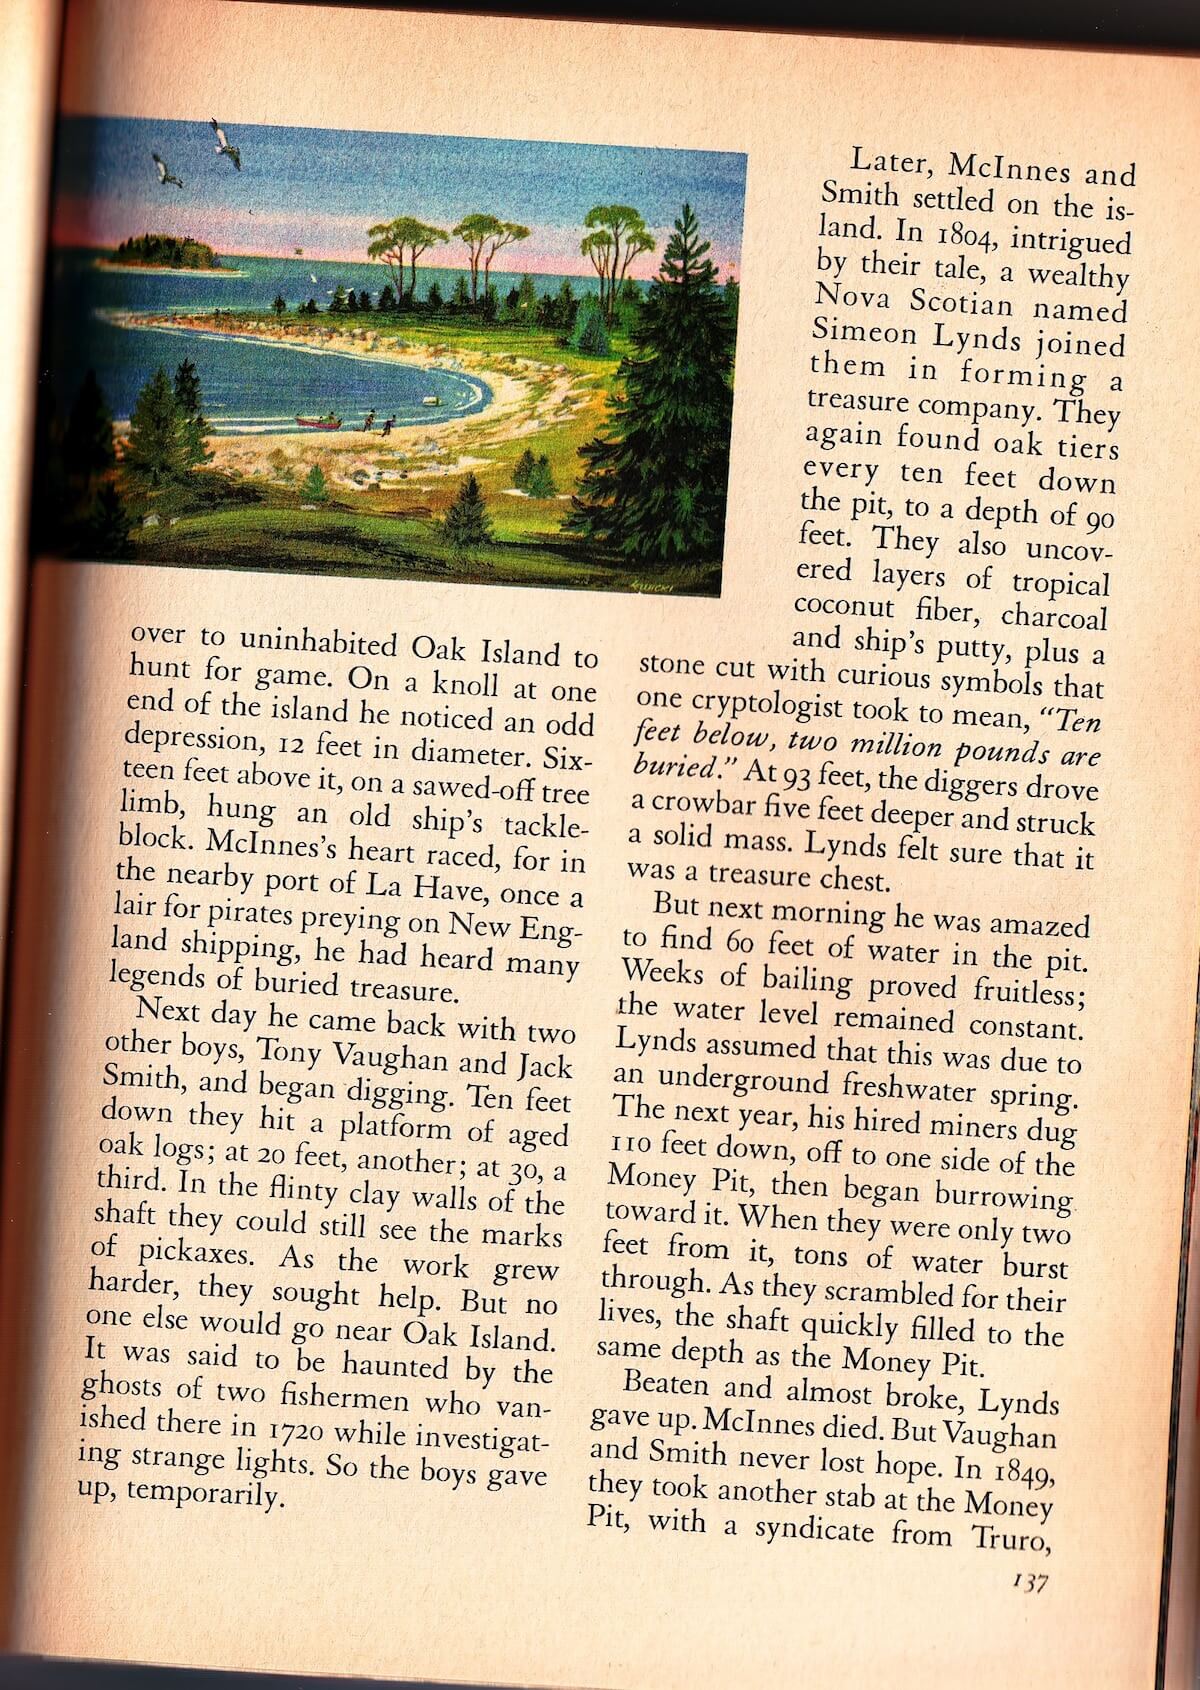 Reader's Digest: Oak Island's Mysterious 'Money Pit' Page 2